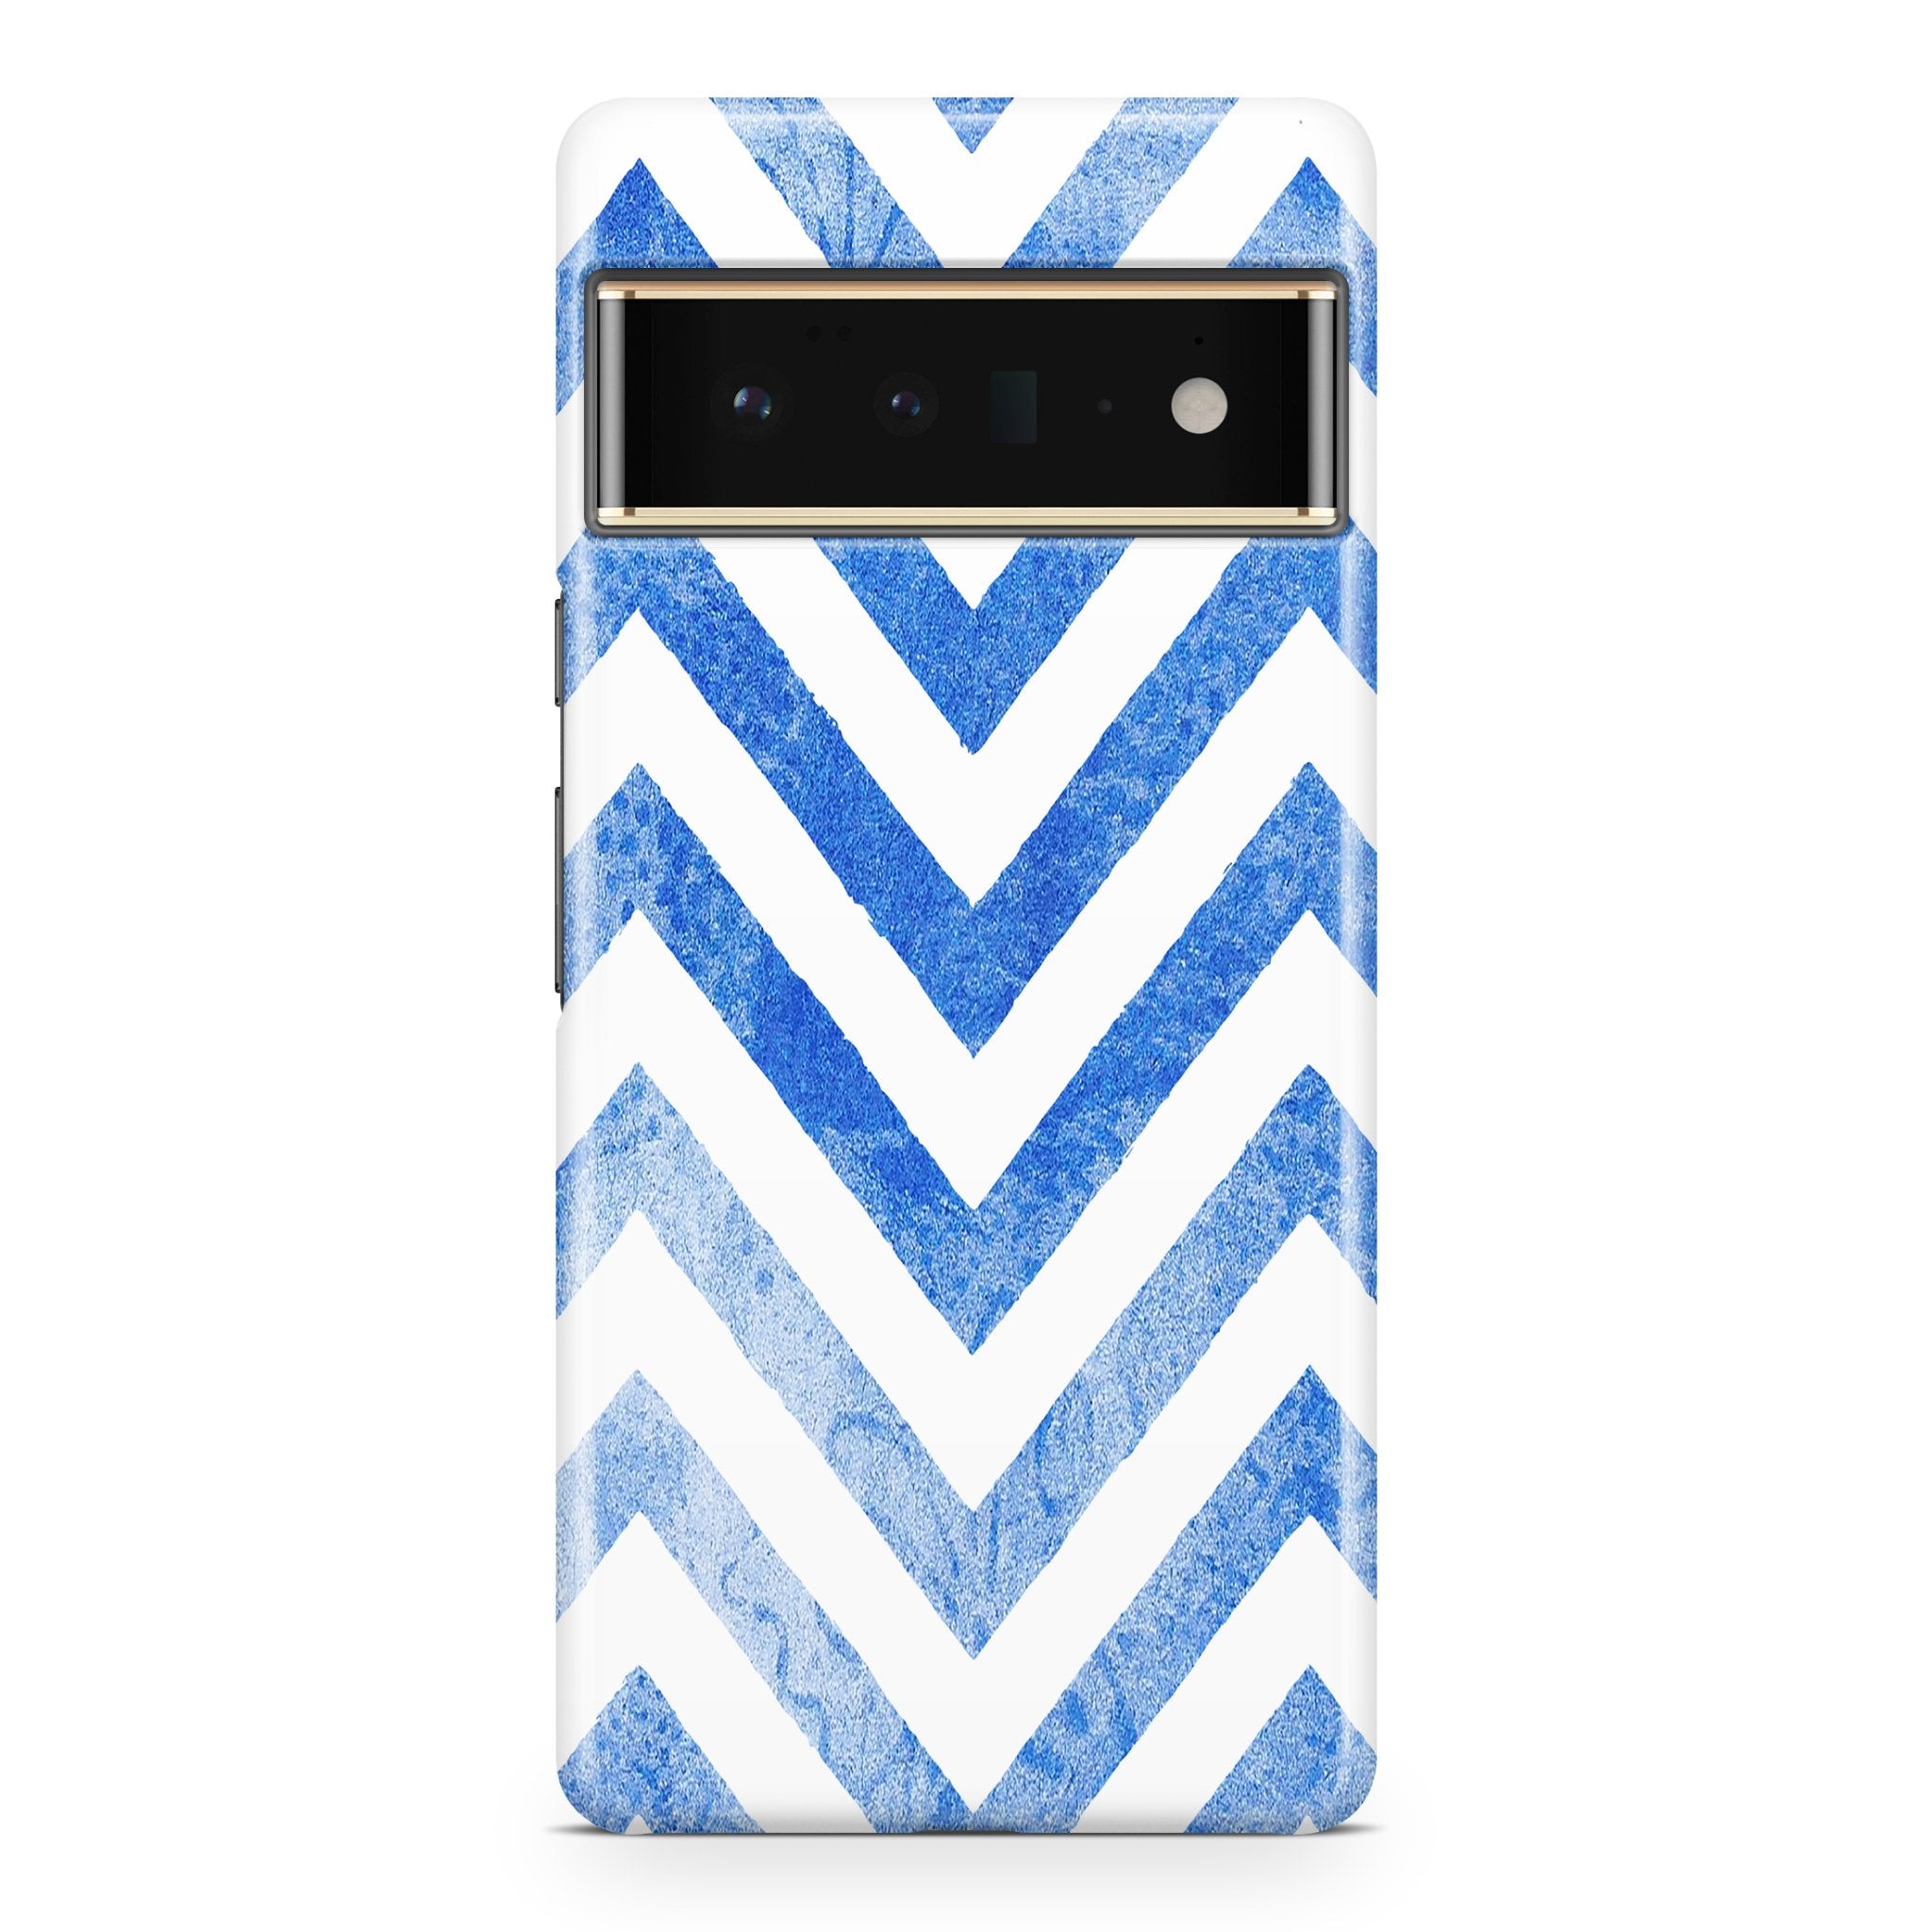 Blue Watercolor Chevrons - Google phone case designs by CaseSwagger